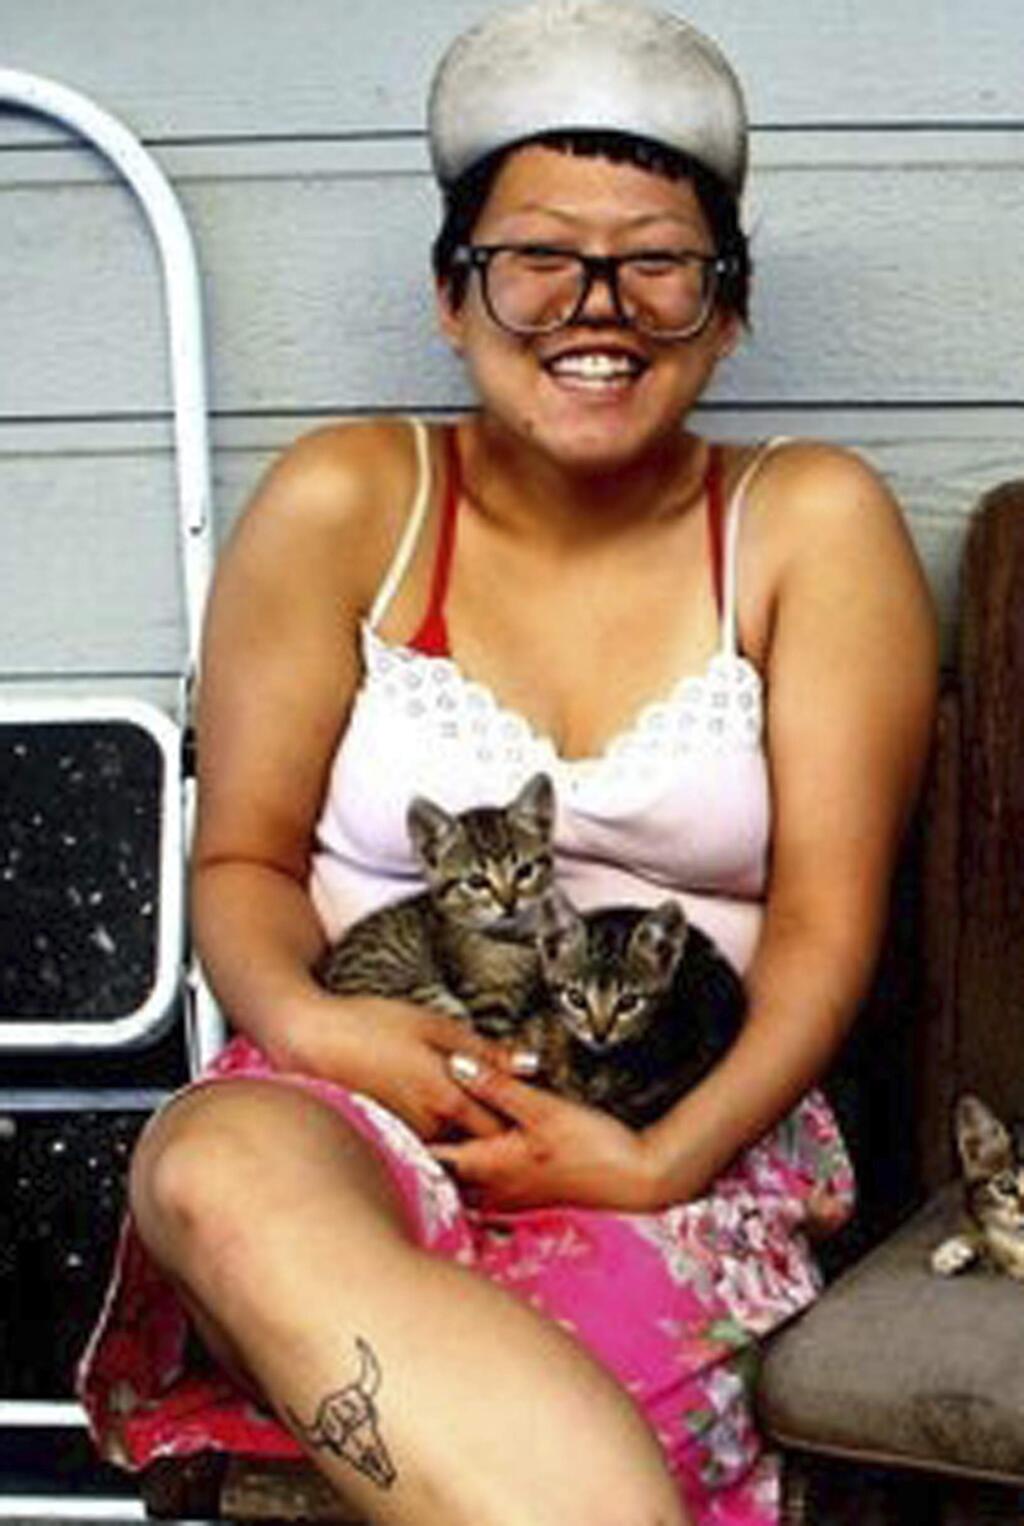 This 2012 photo provided by Terry Ewing shows Ara Jo in New Orleans. Friends called Jo the most adoptable person ever, a vibrant artist and community organizer who could make friends with anyone, anywhere. Jo, 29, grew up in Los Angeles and was living in Oakland. Authorities notified her family, including her parents who flew in in from South Korea, of her death on Monday, Dec. 5, 2016. Jo was one of dozens of people killed in the fire at the Ghost Ship warehouse fire in Oakland, Calif., that started Dec. 2, 2016. (Terry Ewing via AP)